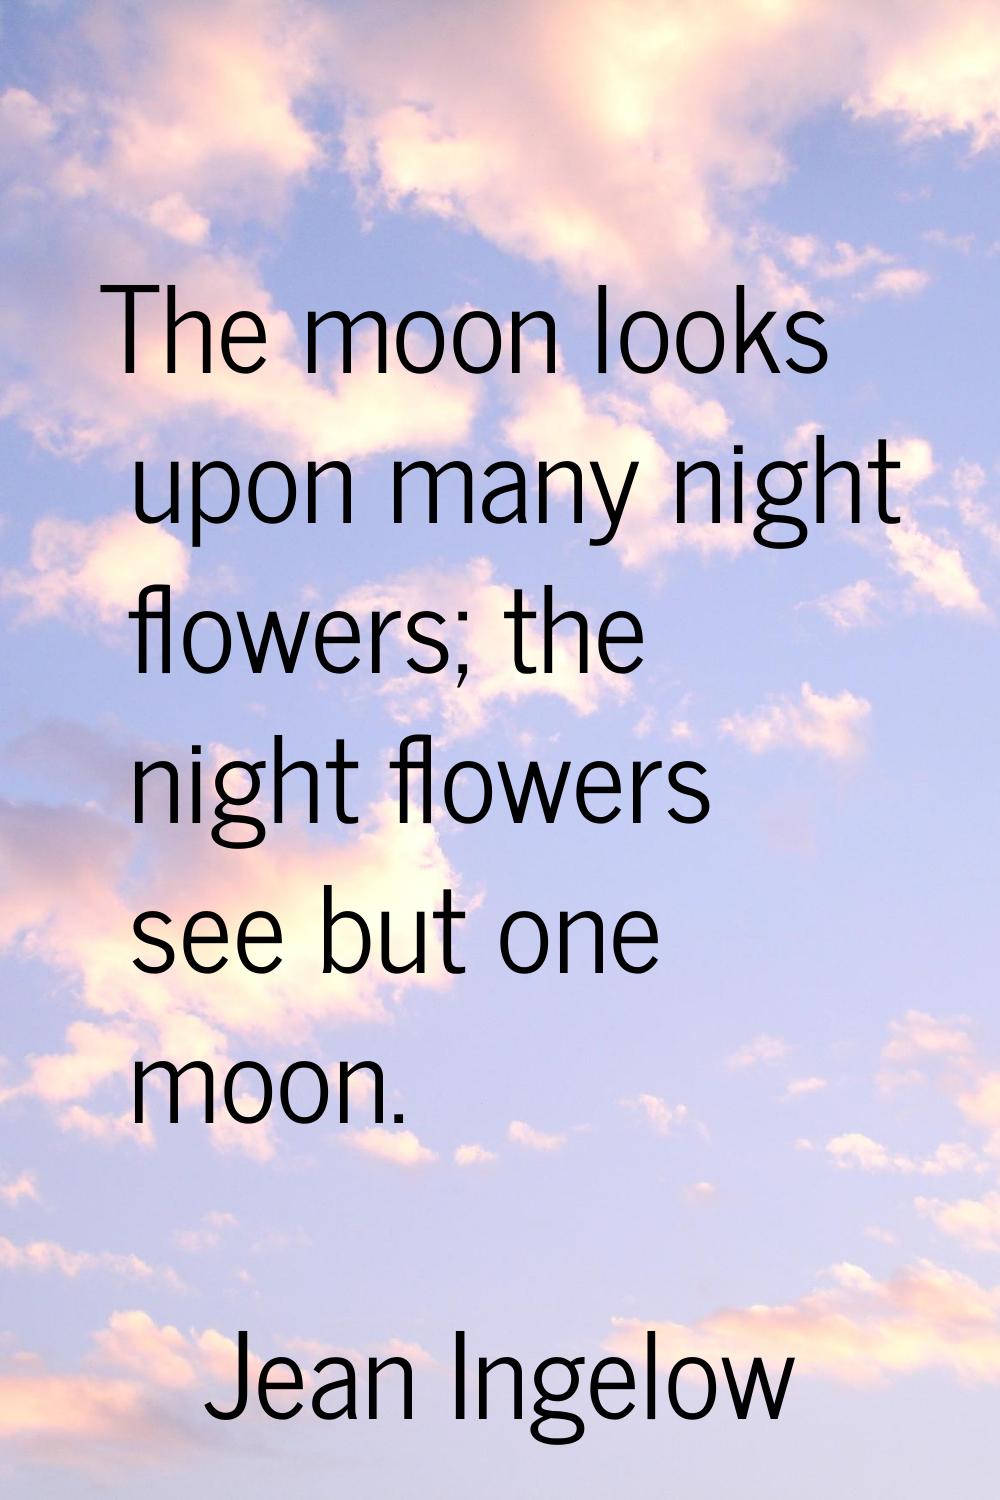 The moon looks upon many night flowers; the night flowers see but one moon.